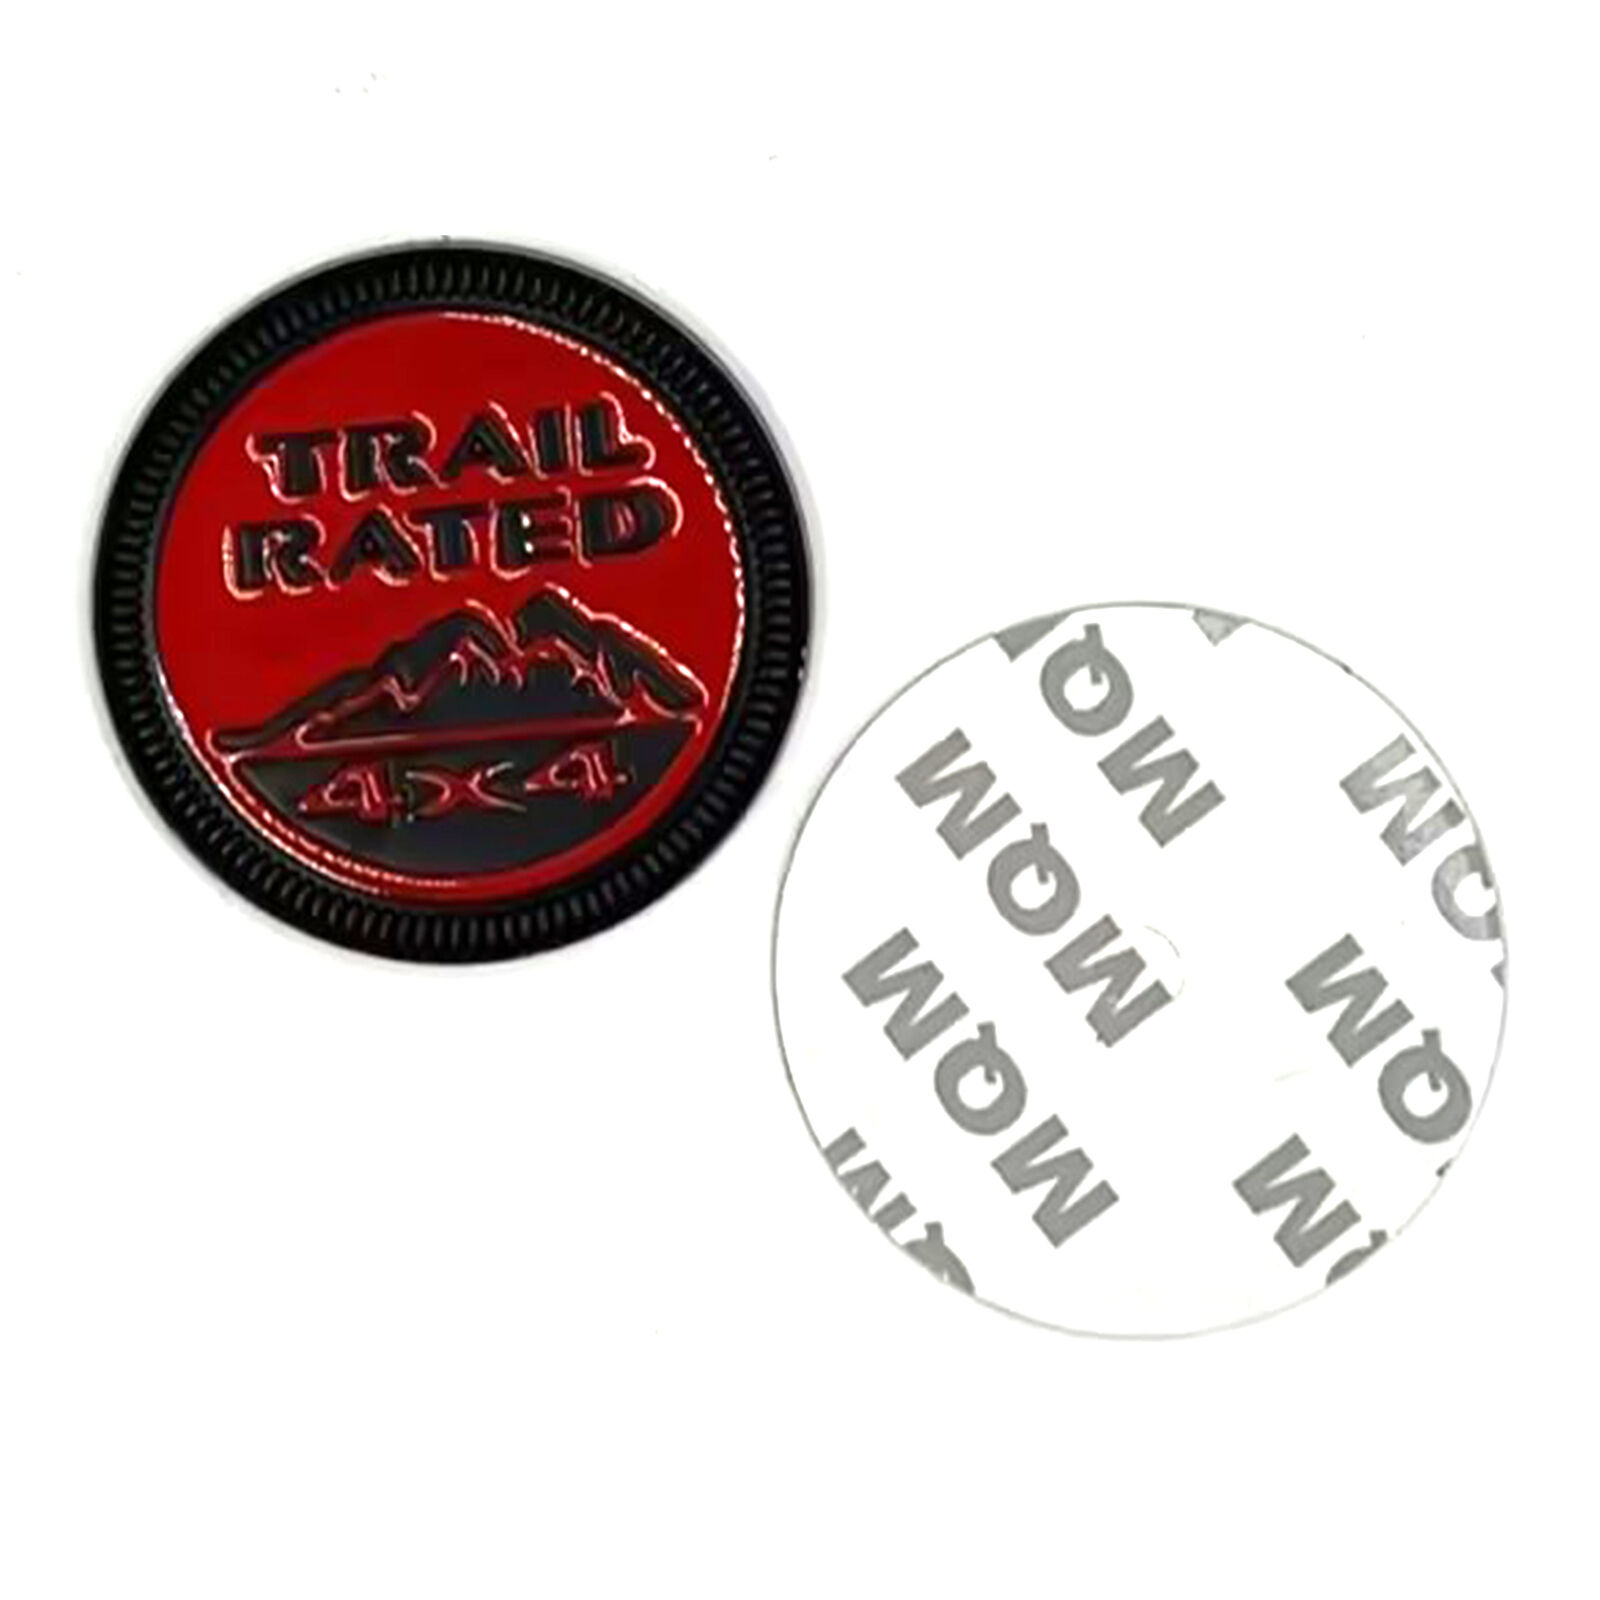 1PC Red & Black 4x4 Trail Rated Badge Sticker Decal Trim Fits For Jeep Emblem